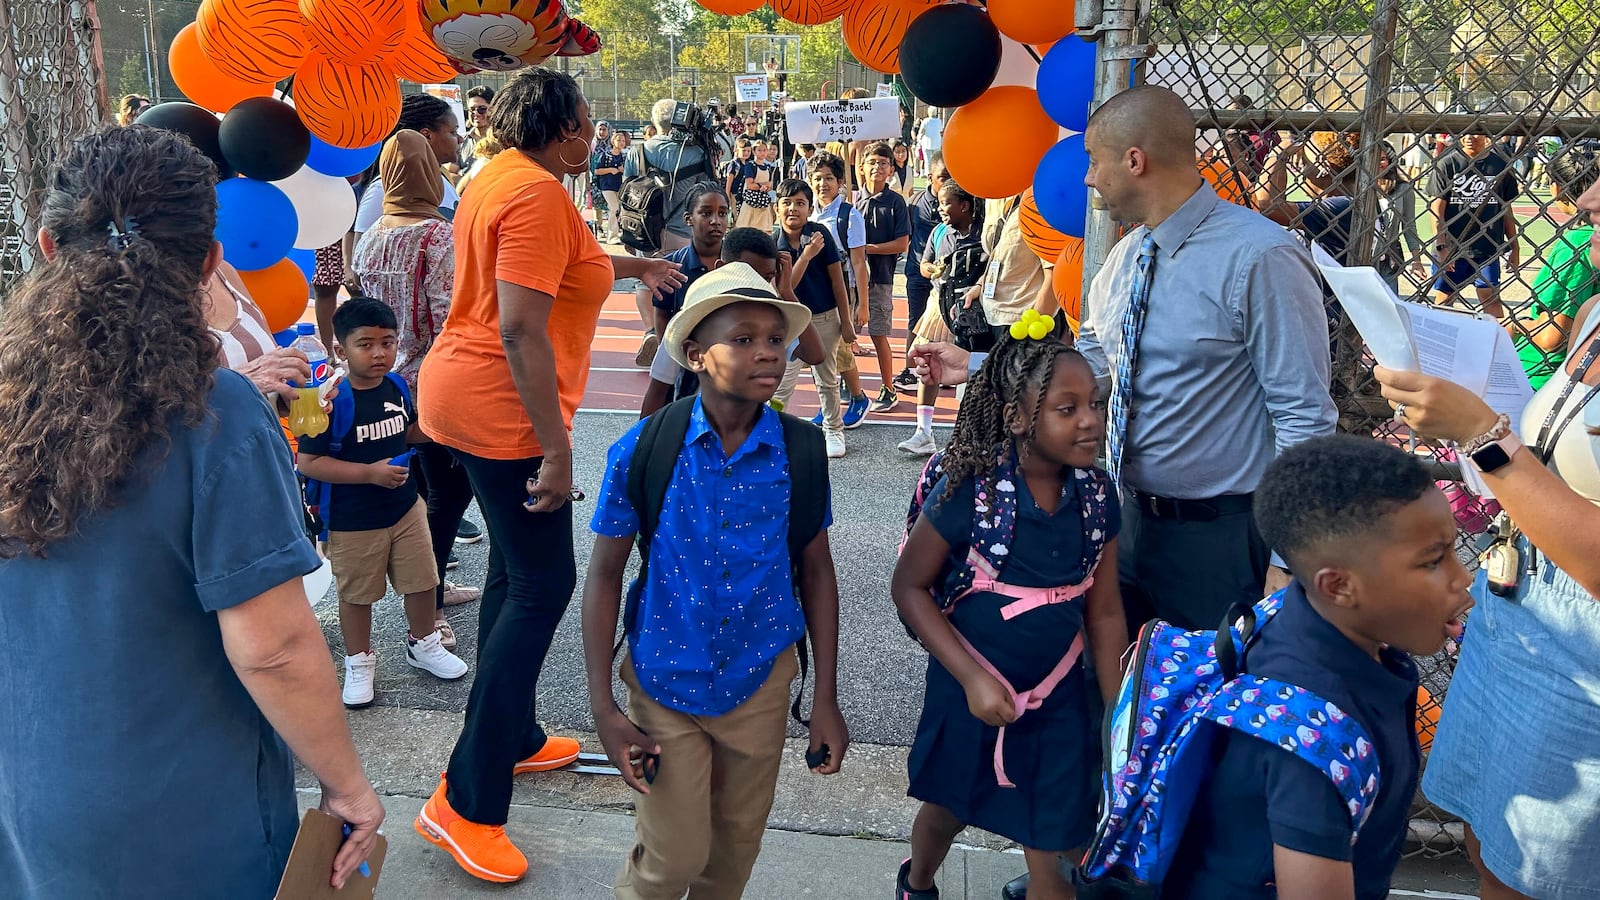 A child in a blue shirt walks under an archway of blue and orange balloons, with other people in the background.